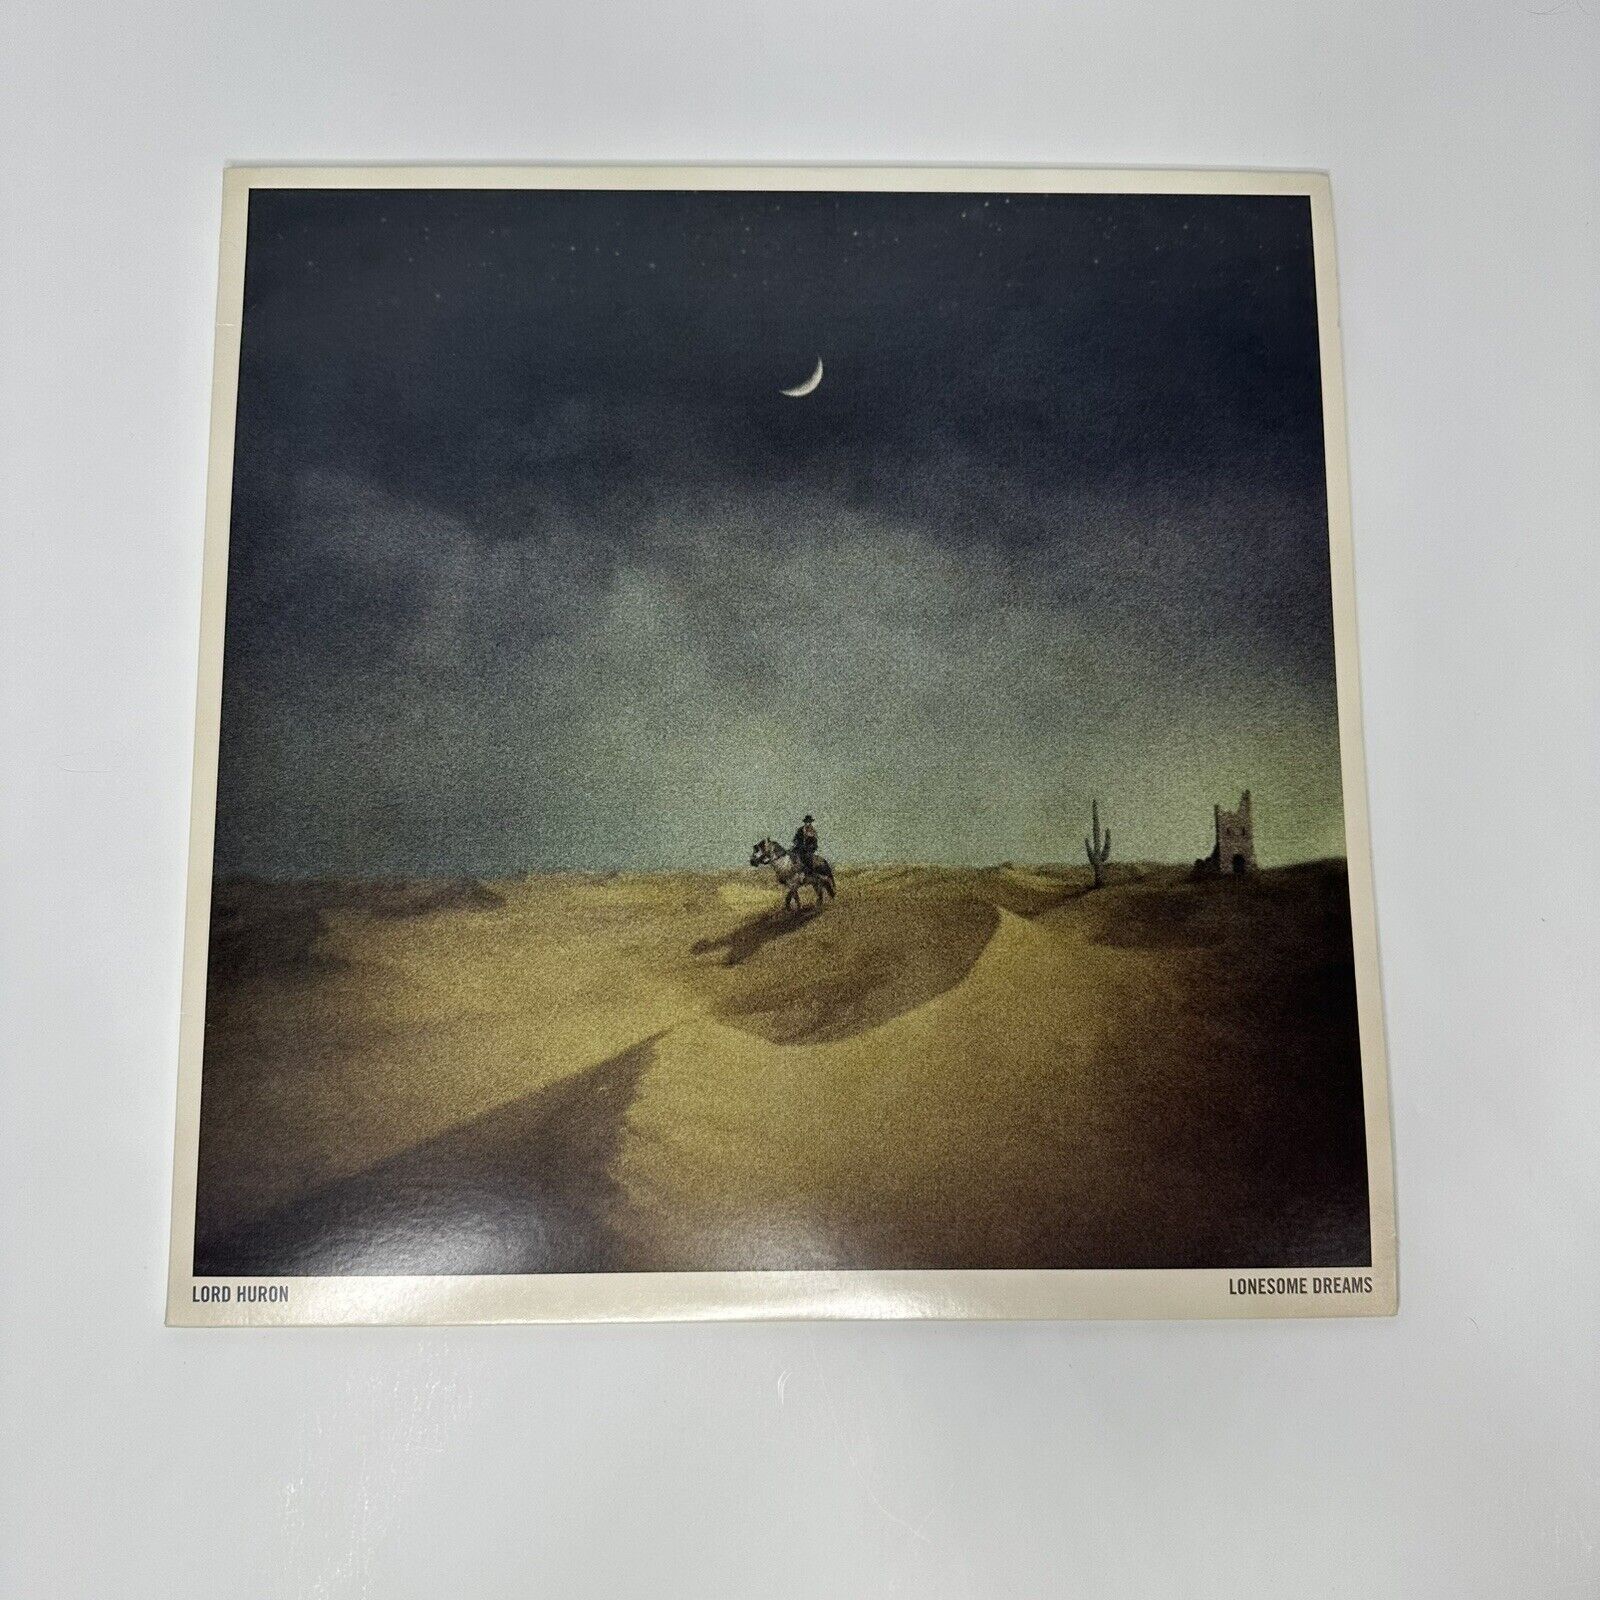 Lonesome Dreams by Lord Huron (Vinyl Record, 2012)